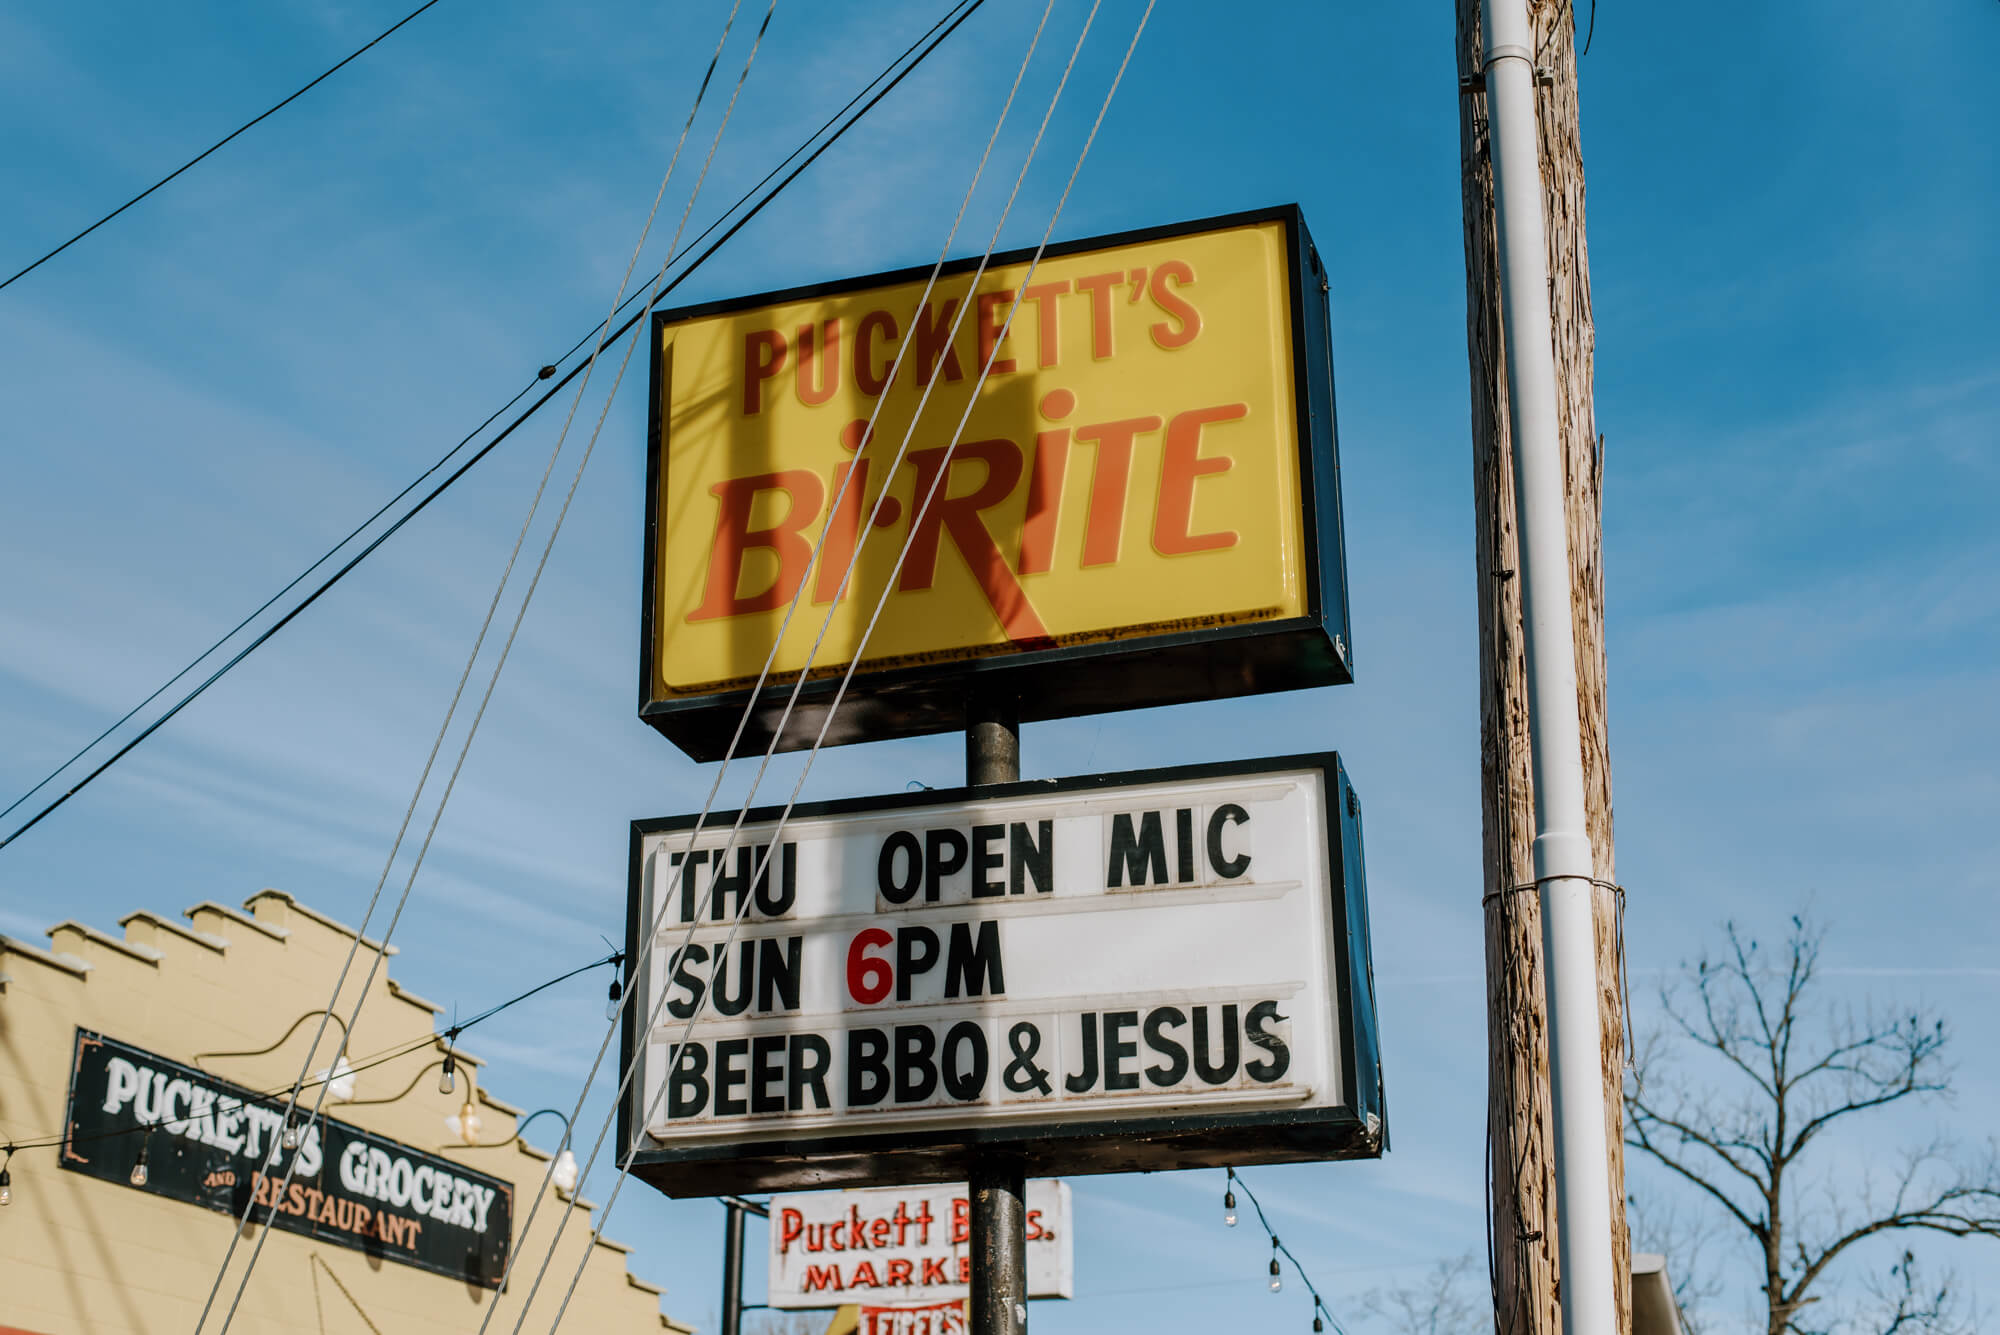 a sign in Leipers Fork, Tennessee reads "Puckett's Bi-Rite. Bear, BBQ, and Jesus."